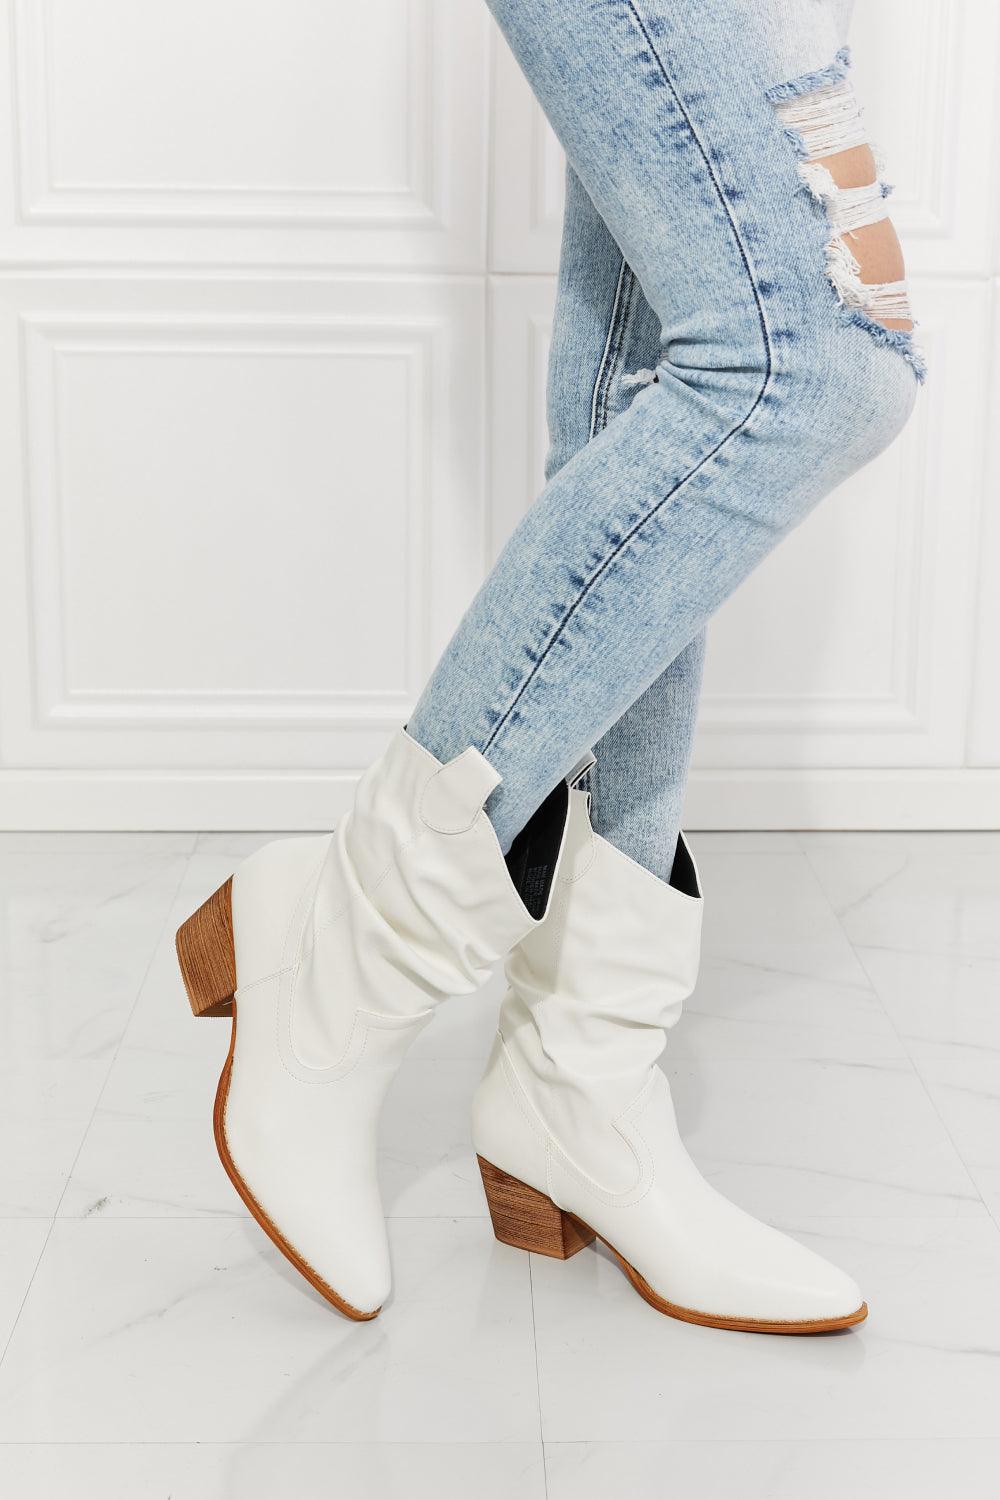 MMShoes Better in Texas Scrunch Cowboy Boots in White - Lab Fashion, Home & Health